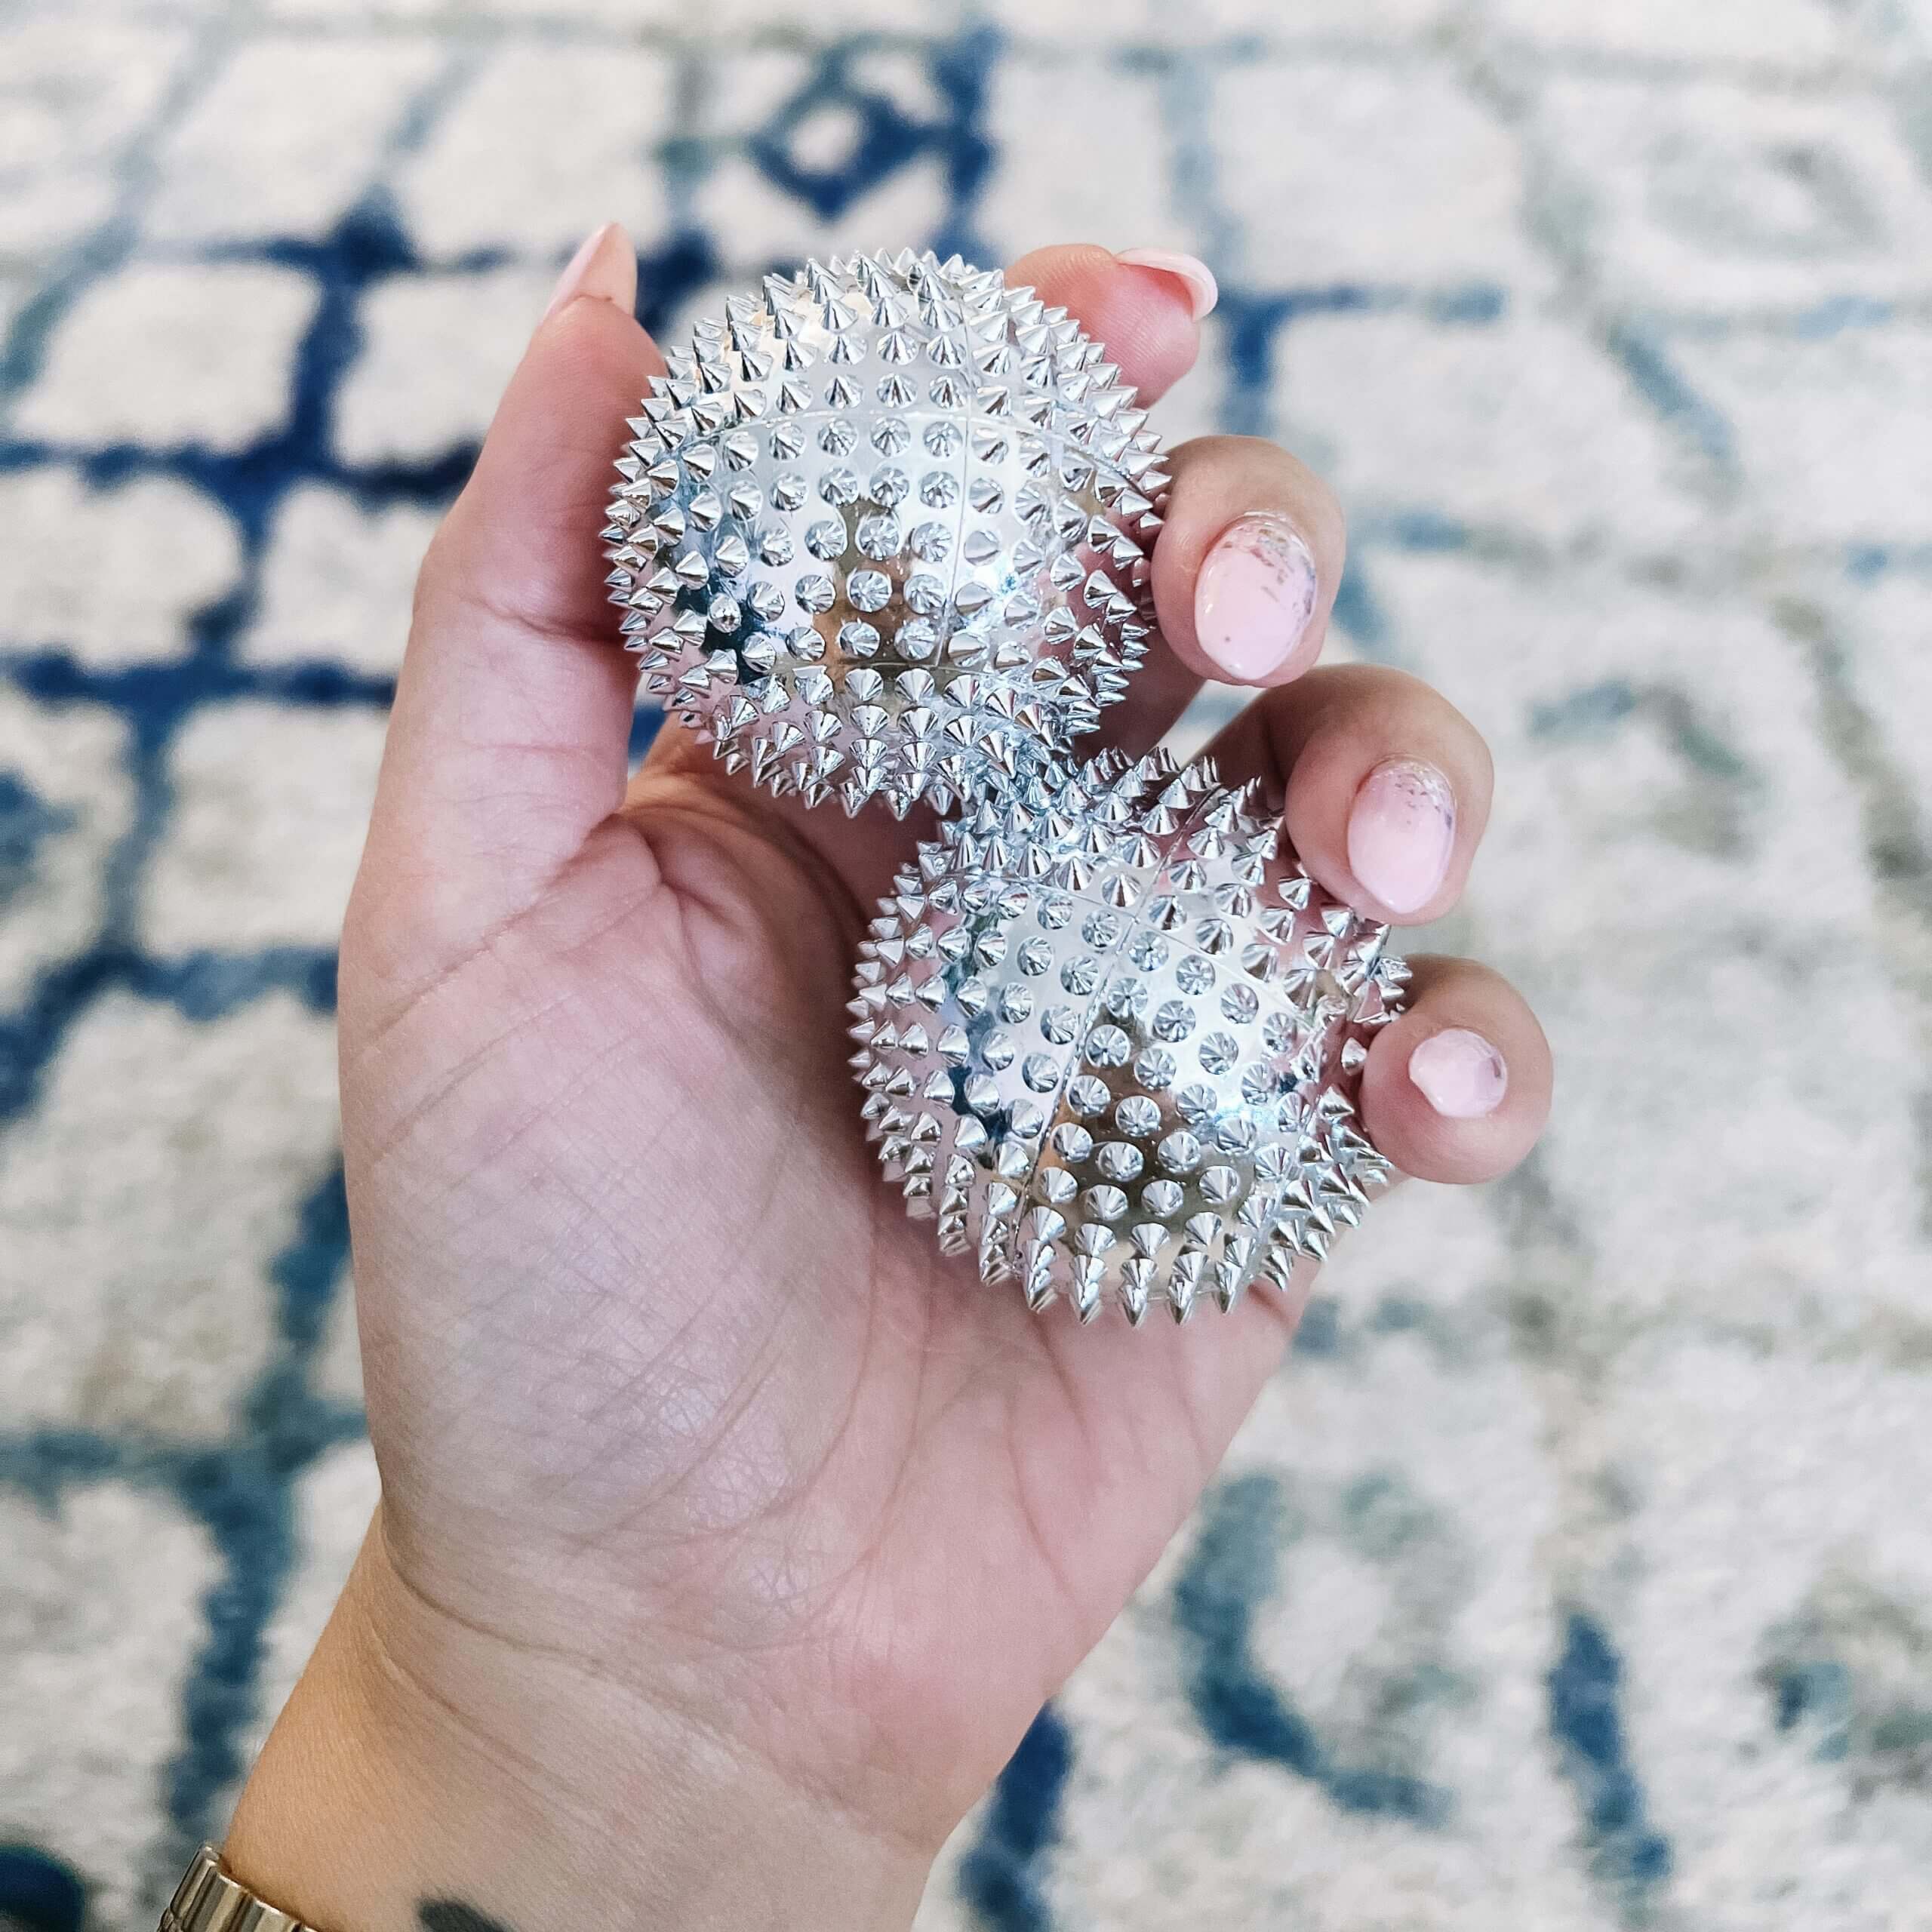 Spikey Magnetic Balls for Coping